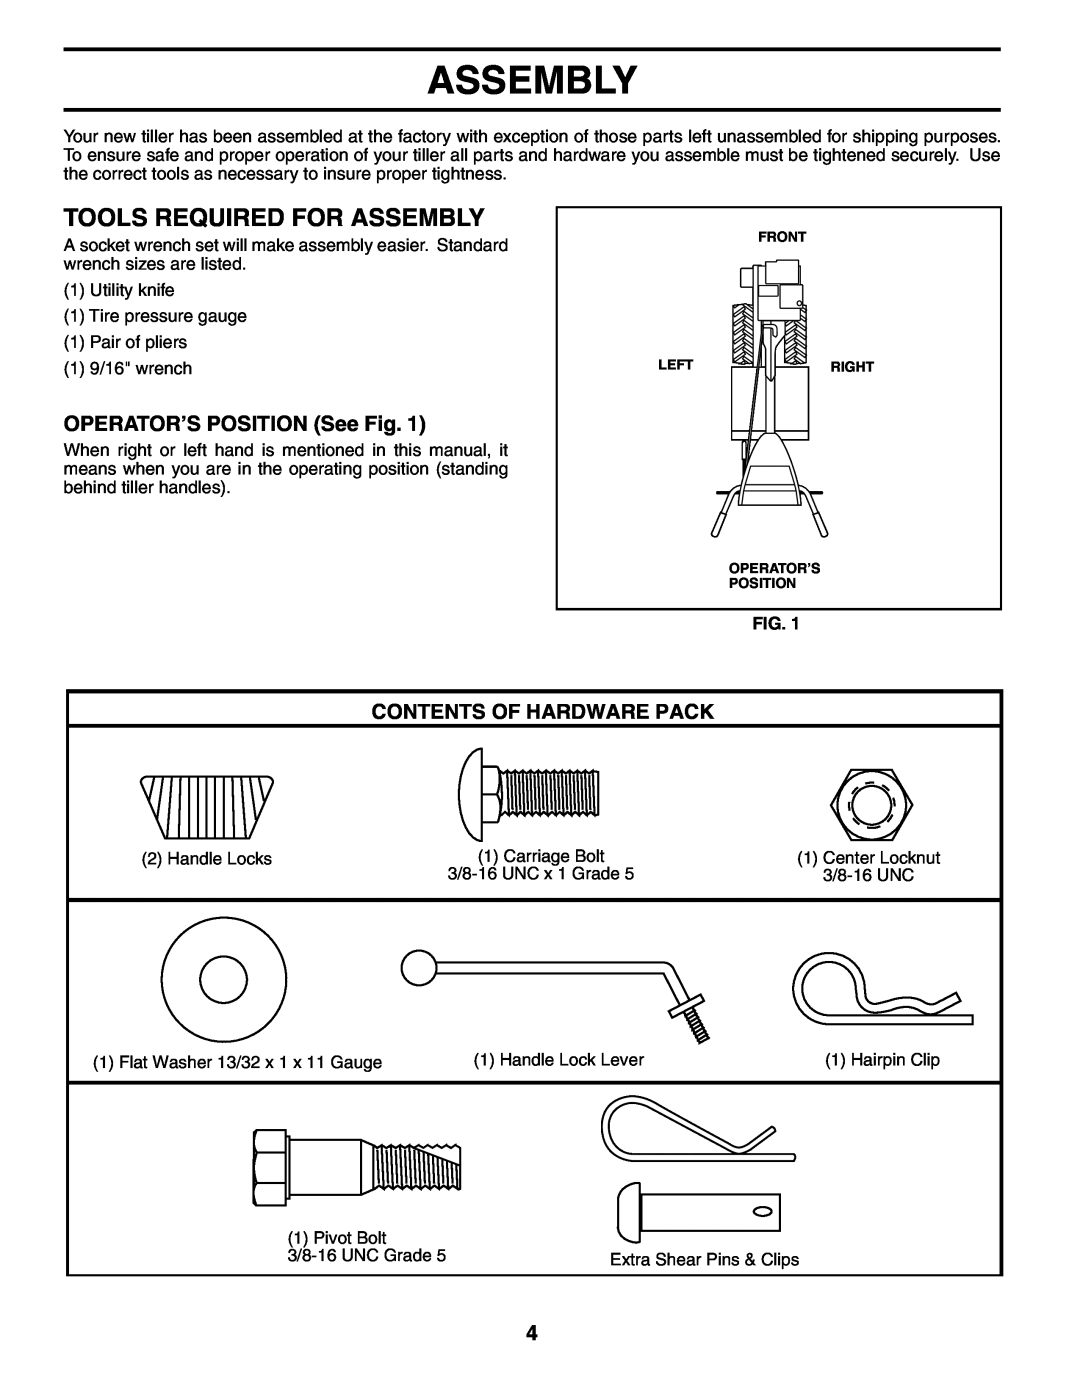 Poulan PRRT65 manual Tools Required For Assembly, OPERATOR’S POSITION See Fig, Contents Of Hardware Pack 